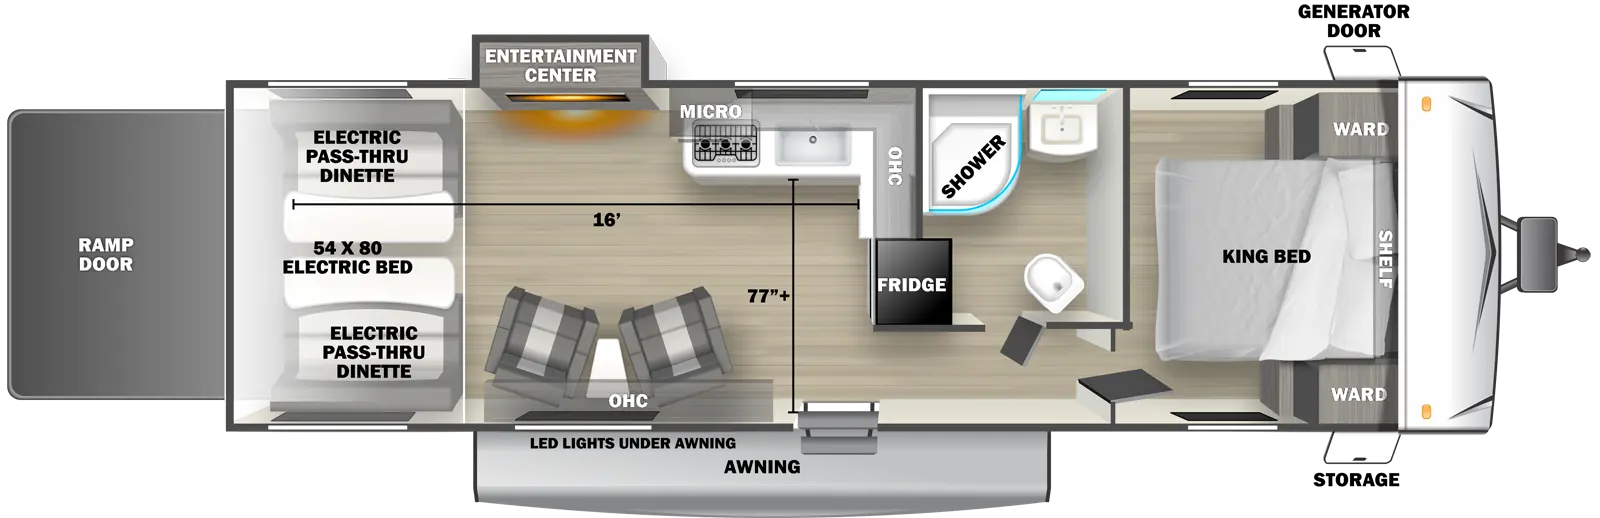 The 2700SLS travel trailer has 1 slide out on the off-door side, 1 entry door and 1 rear ramp door. Exterior features include an awning with LED lights, front door side storage and front off-door side generator door. Interior layout from front to back includes: front bedroom with foot-facing King bed, shelf over the bed, and front corner wardrobes; off-door side bathroom with shower, linen storage, toilet and single sink vanity; off-door side L-shaped kitchen countertop with stovetop, overhead microwave and cabinets, sink, and rear facing refrigerator; 2 door side recliners with end table; off-door side slideout holding an entertainment center; and rear 54 x 80 electric bed over electric pass-through dinette. Cargo length from rear of unit to kitchen countertop is 16 ft. Cargo width from kitchen countertop to door side wall is 77 inches.